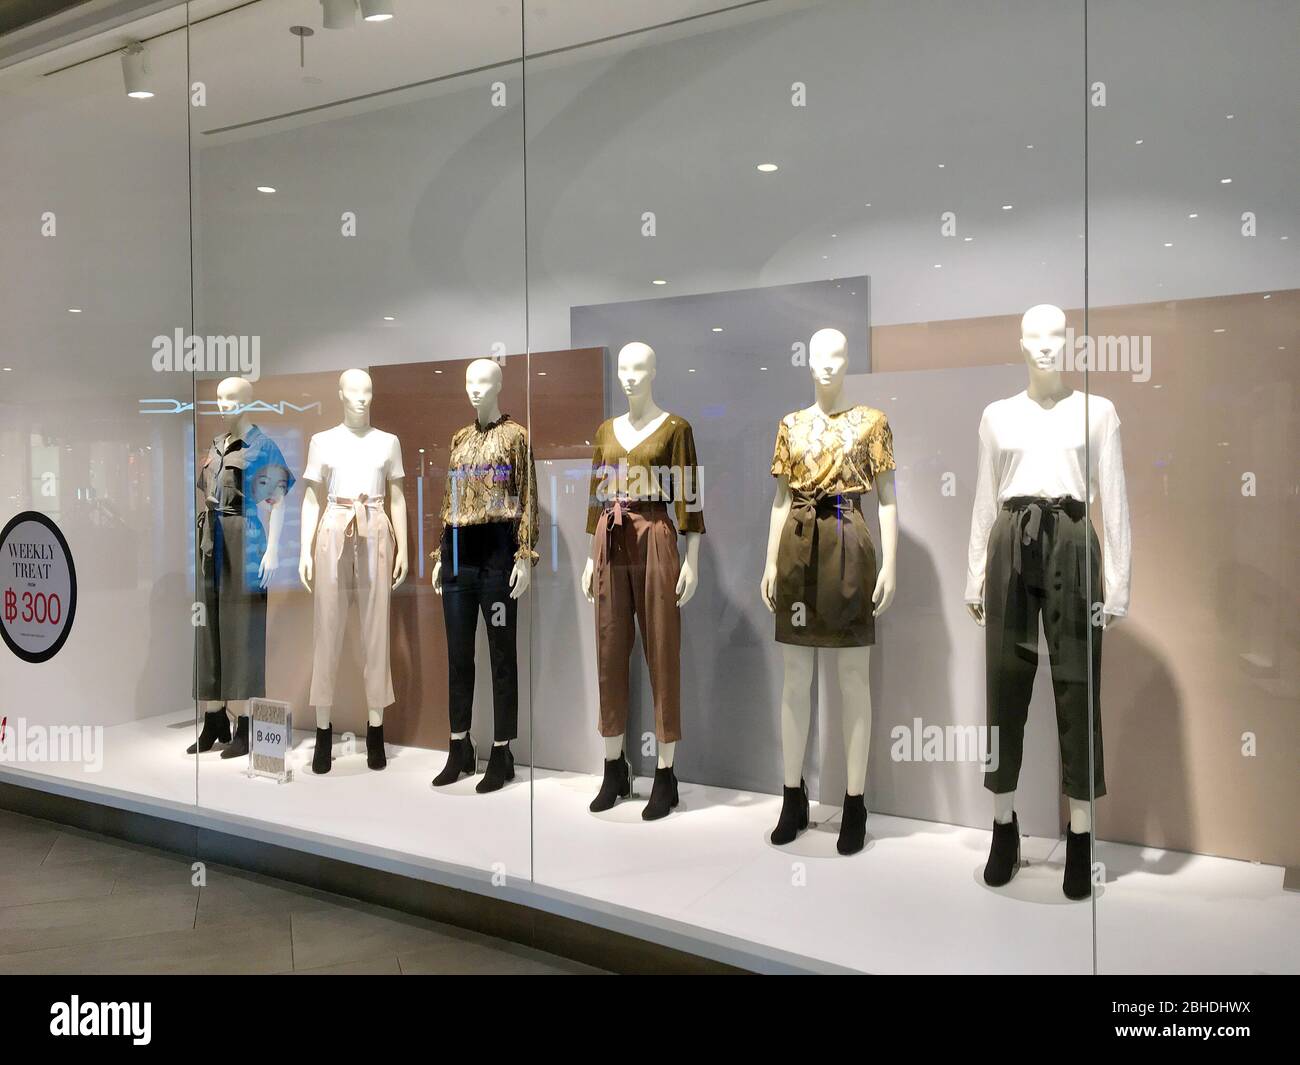 The H&M clothed mannequins with female fashion clothing and red and white  bolloons in the glass-window display in Blueport shopping mall Hua Hin,  Thai Stock Photo - Alamy